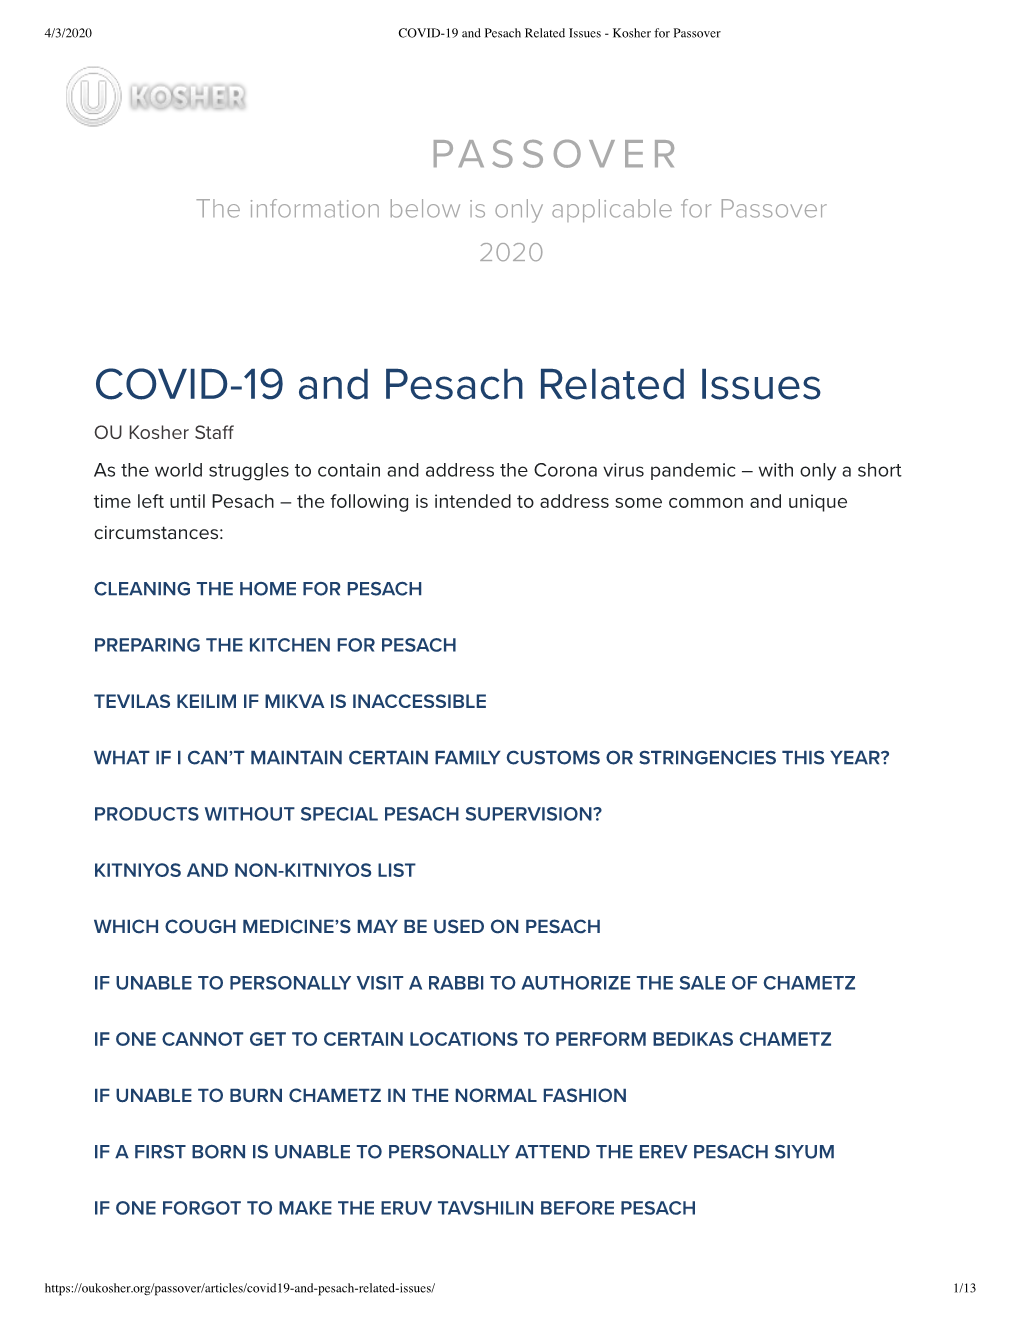 COVID-19 and Pesach Related Issues - Kosher for Passover